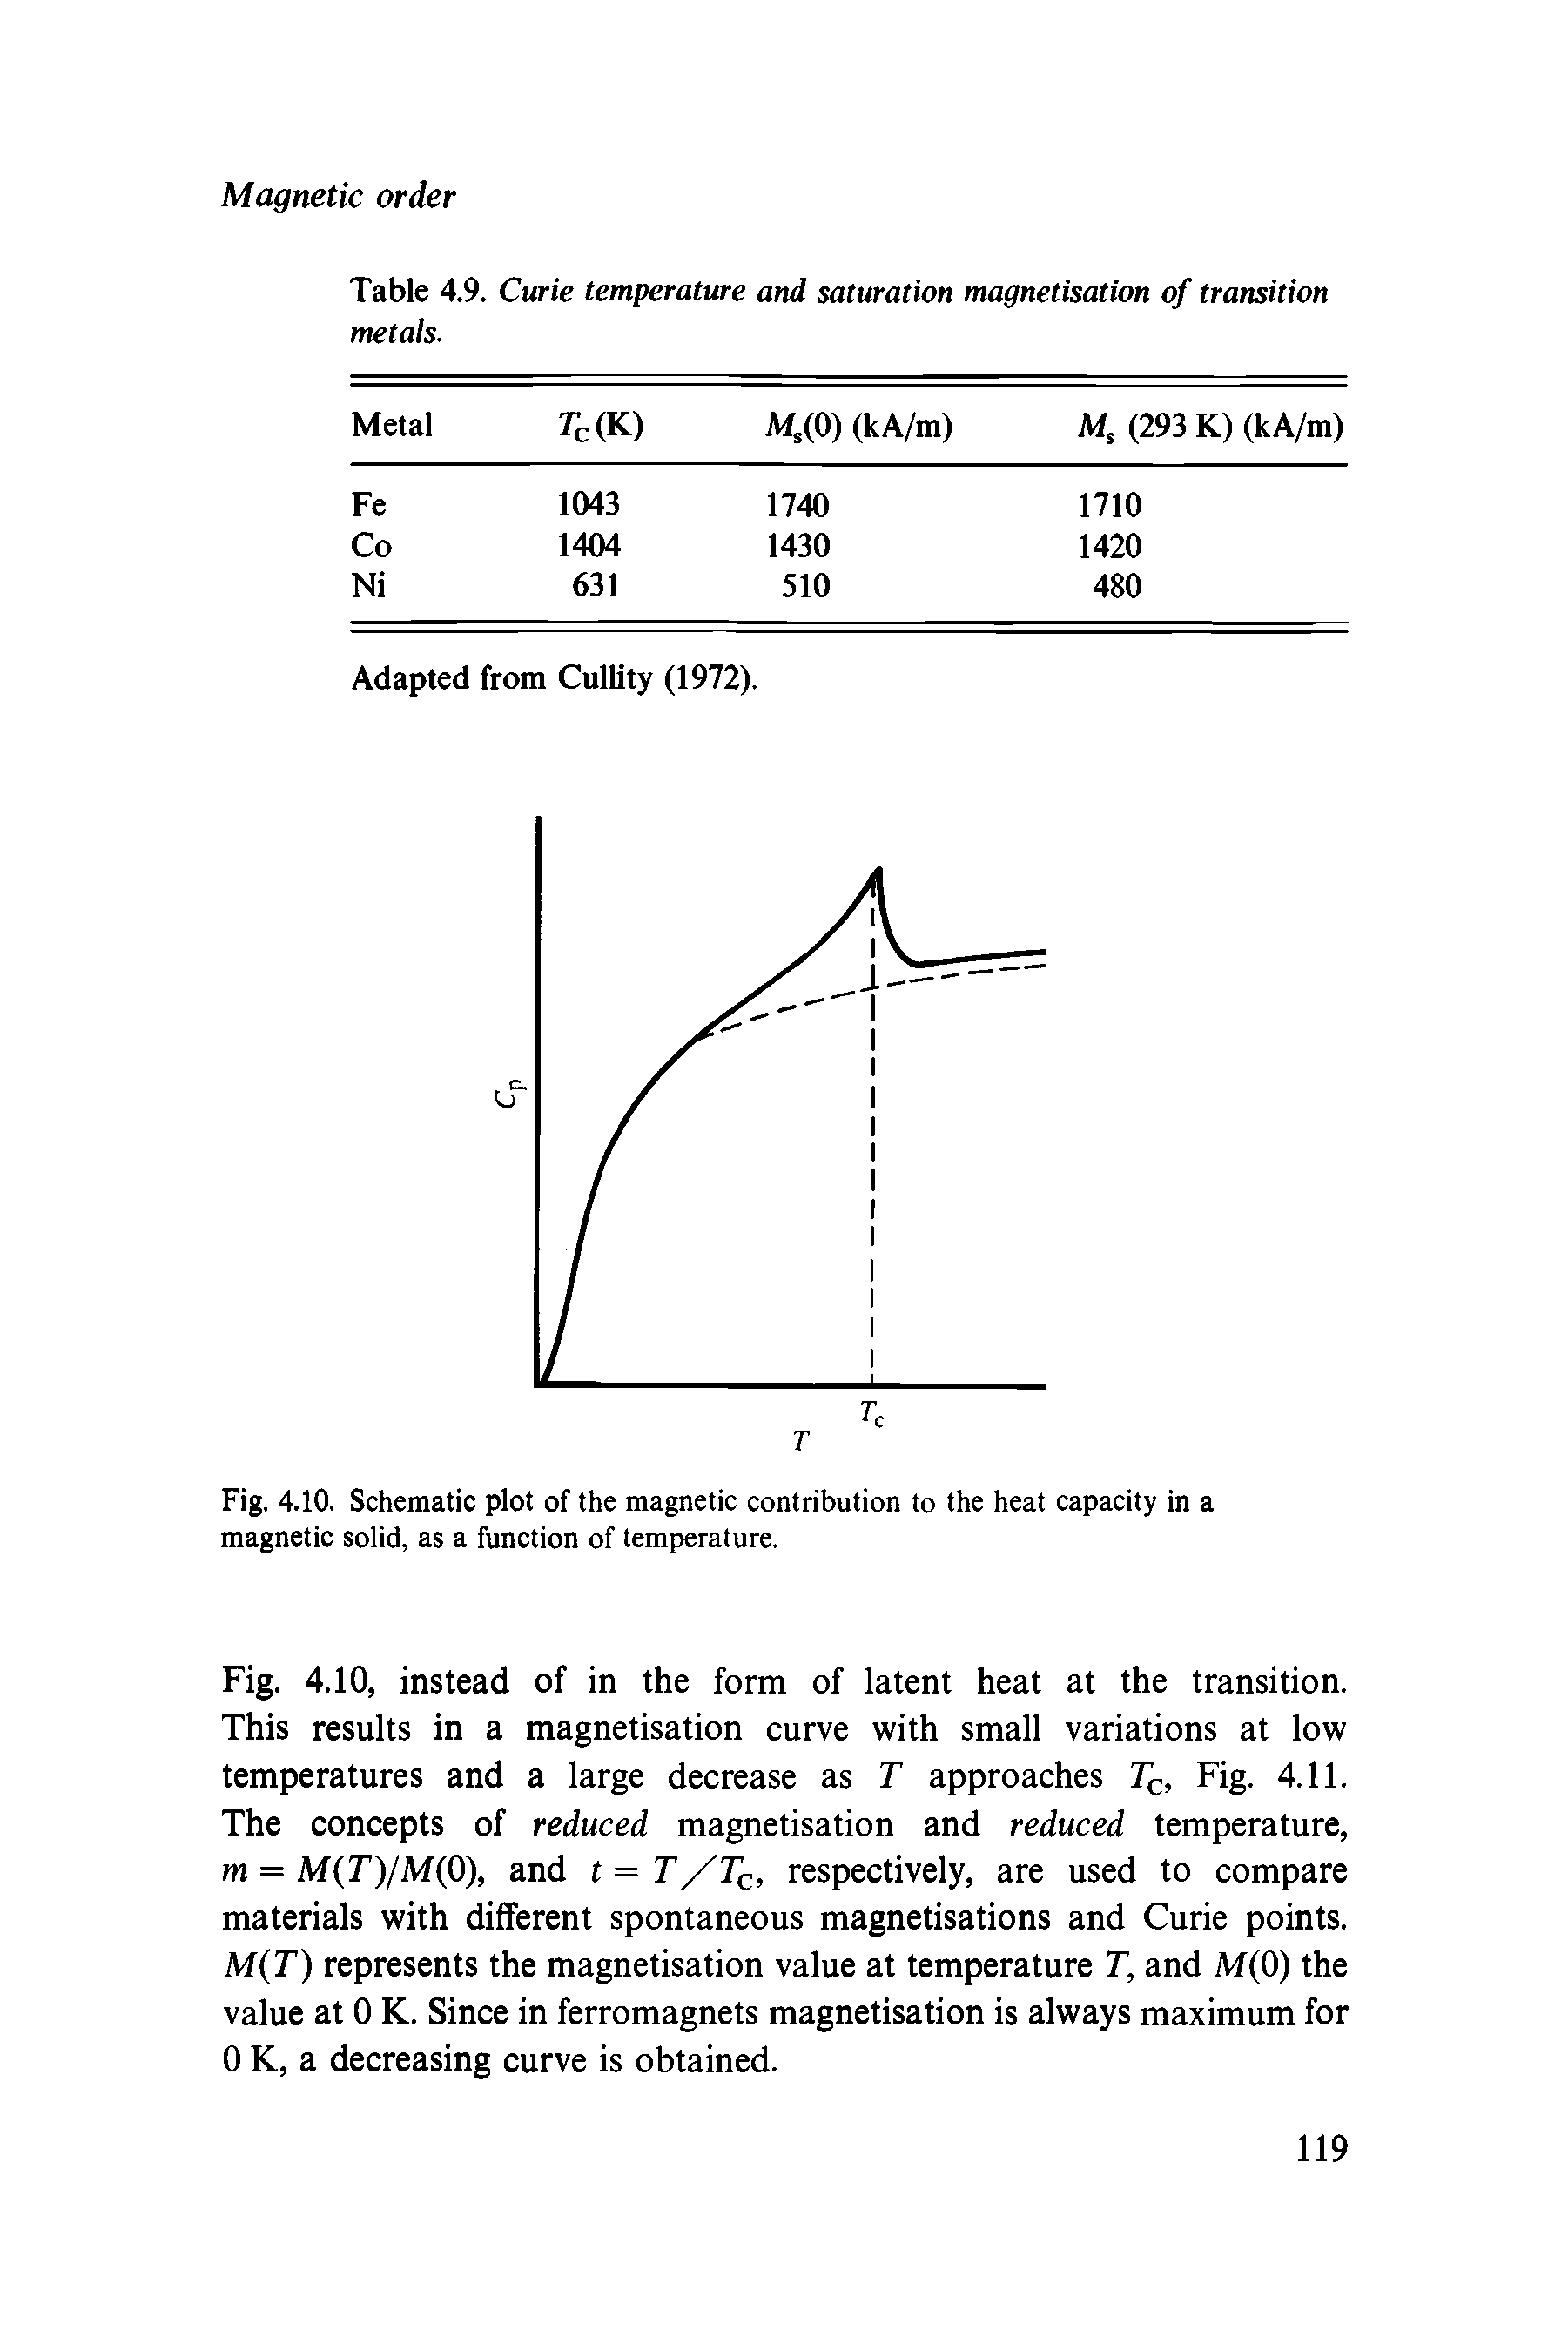 Fig. 4.10, instead of in the form of latent heat at the transition. This results in a magnetisation curve with small variations at low temperatures and a large decrease as T approaches Tq, Fig. 4.11. The concepts of reduced magnetisation and reduced temperature, m = M(T)fM(0), and t = T/Tq, respectively, are used to compare materials with different spontaneous magnetisations and Curie points. M T) represents the magnetisation value at temperature T, and M(0) the value at 0 K. Since in ferromagnets magnetisation is always maximum for 0 K, a decreasing curve is obtained.